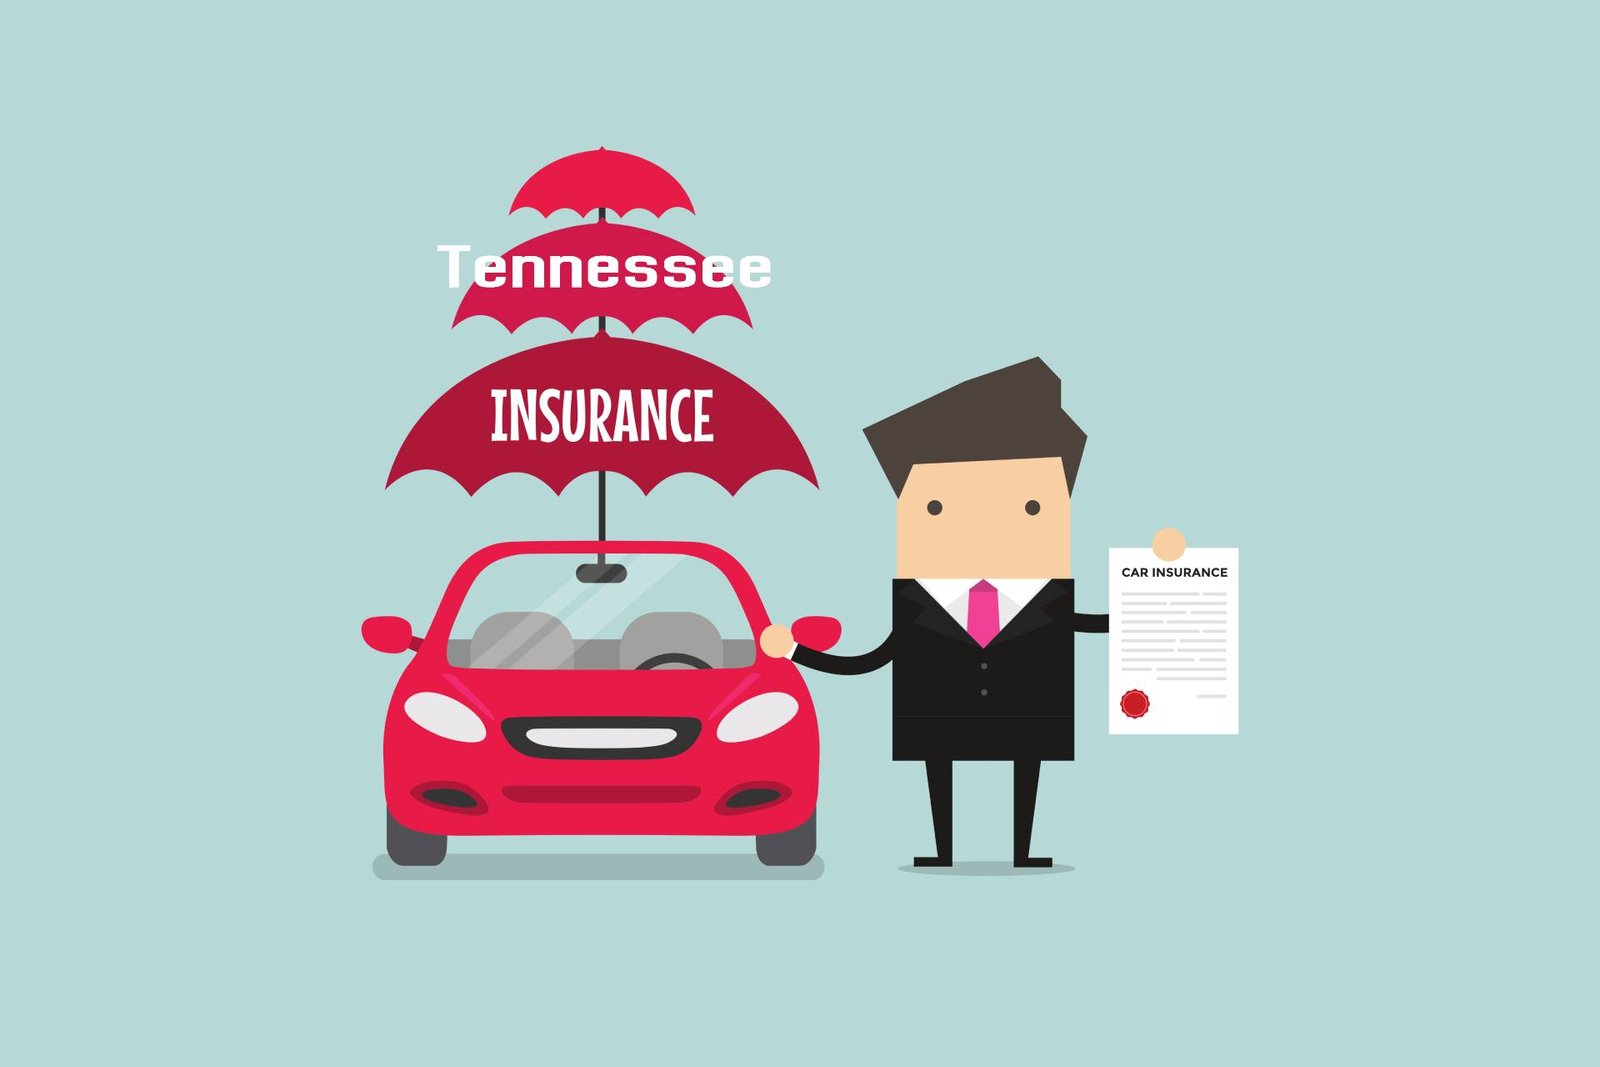 Car insurance in Tennessee